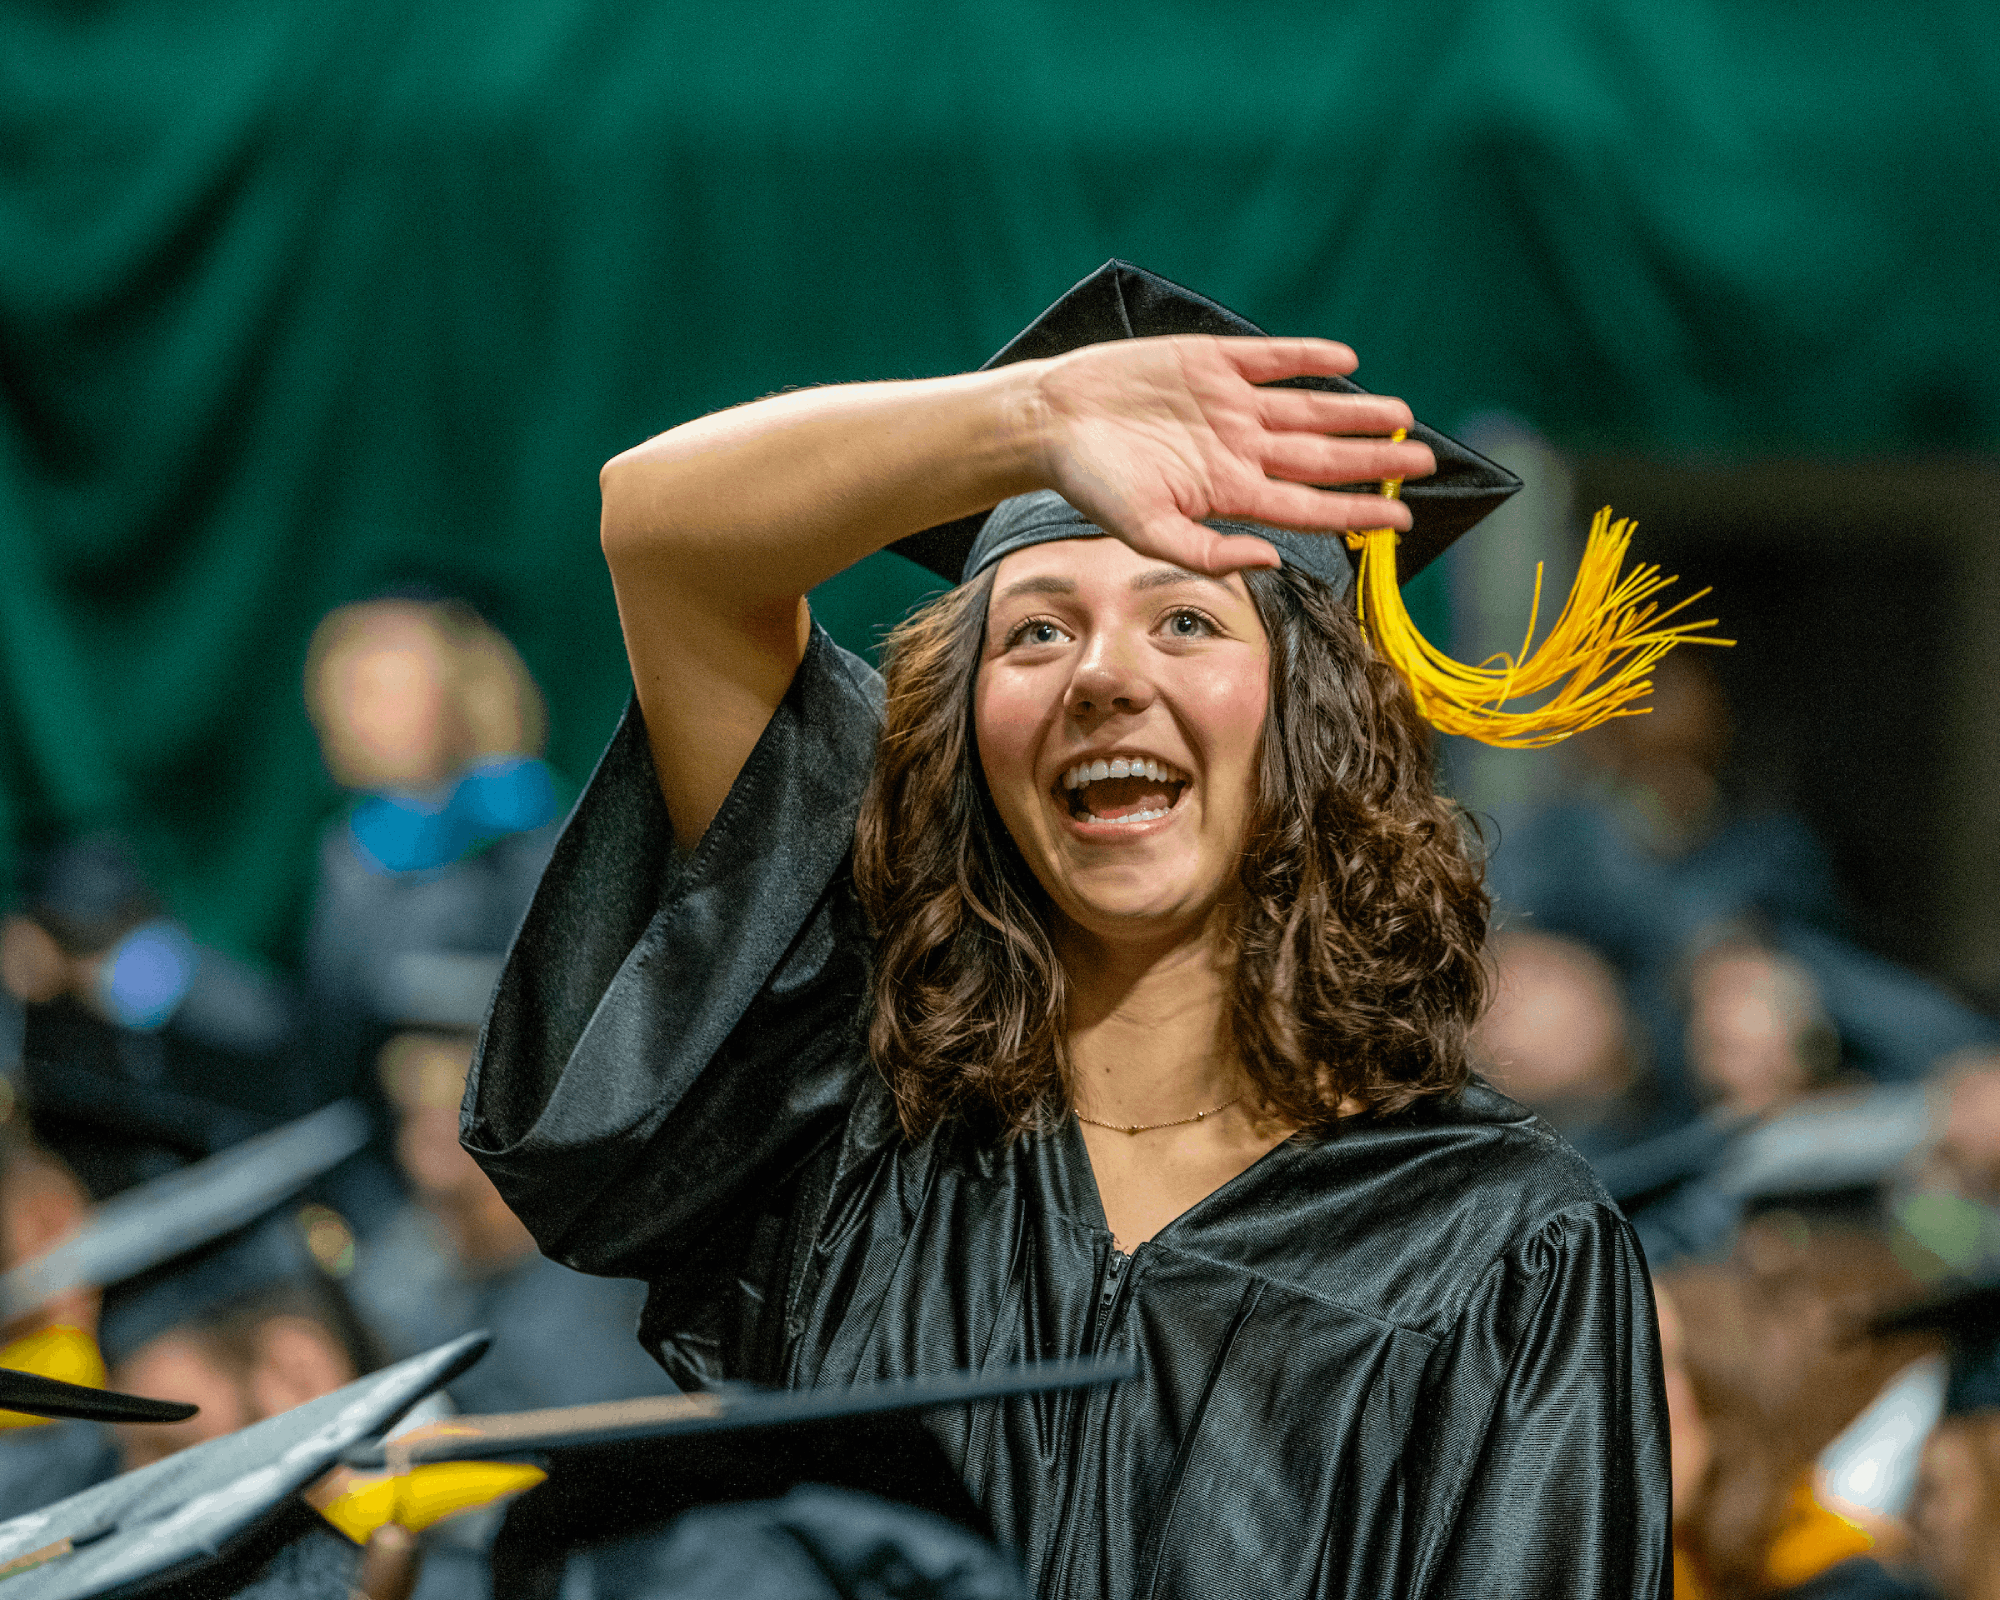 Graduates waving to supporters at a fall graduation ceremony.